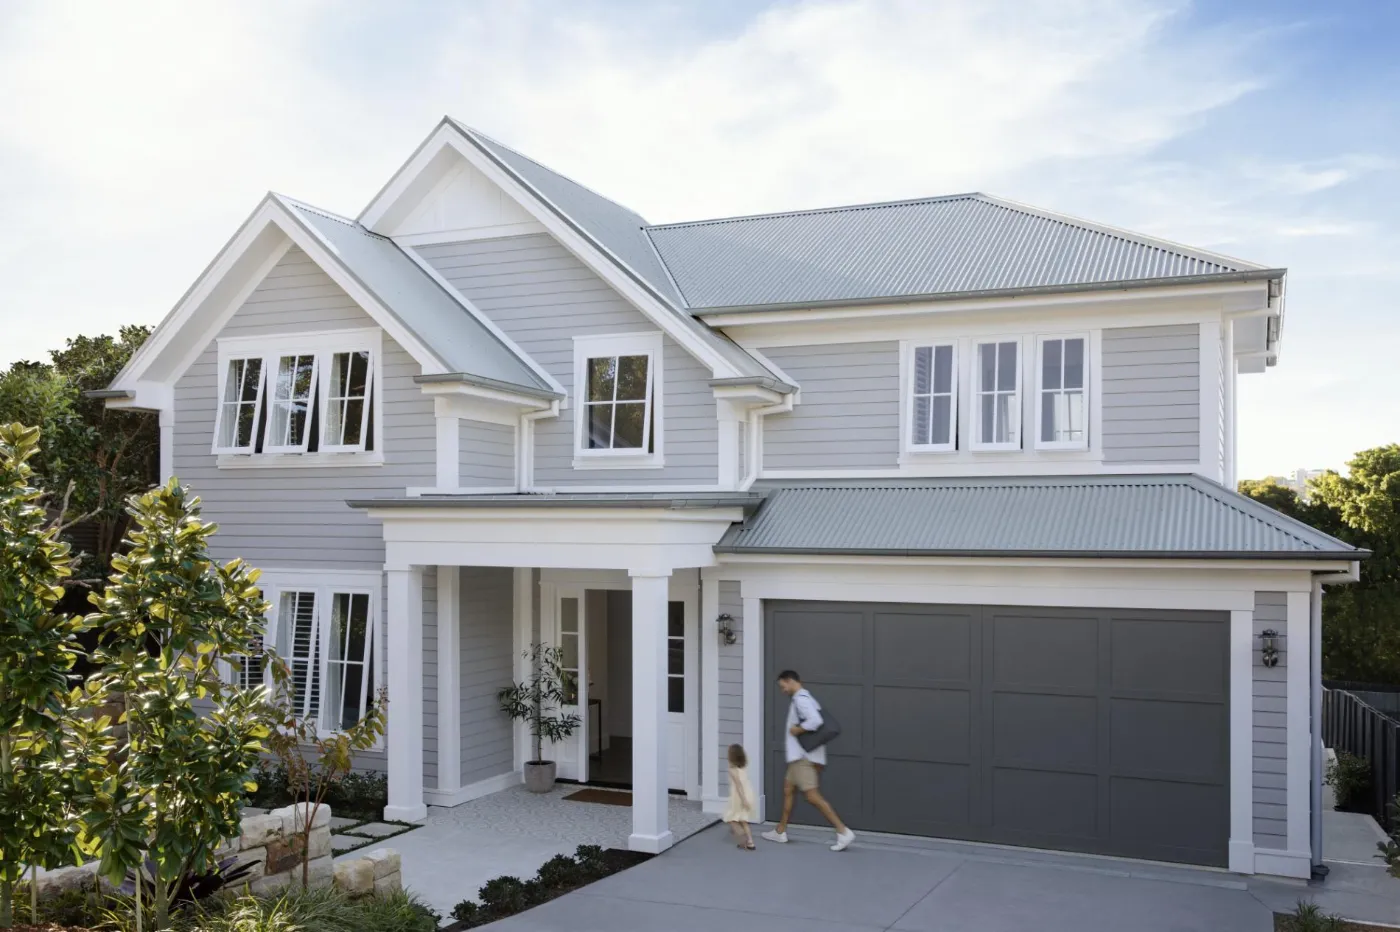 New grey and white hamptons style house